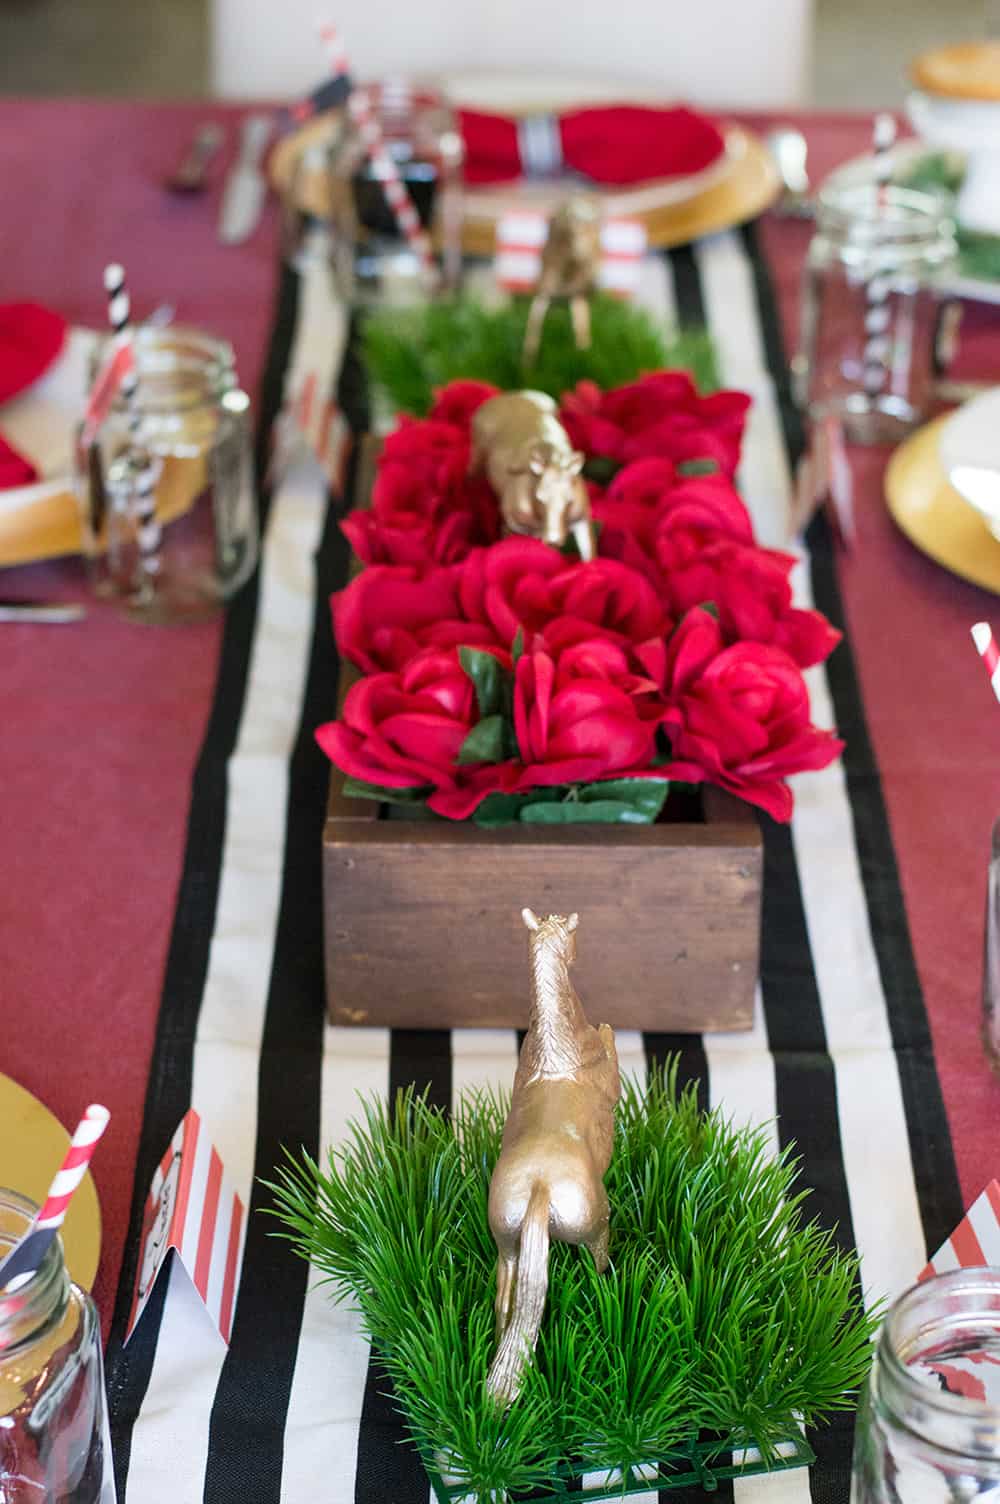 Kentucky Derby Centerpieces styled by Elva M Design Studio and Legally Crafty | All the details at elvamdesign.com